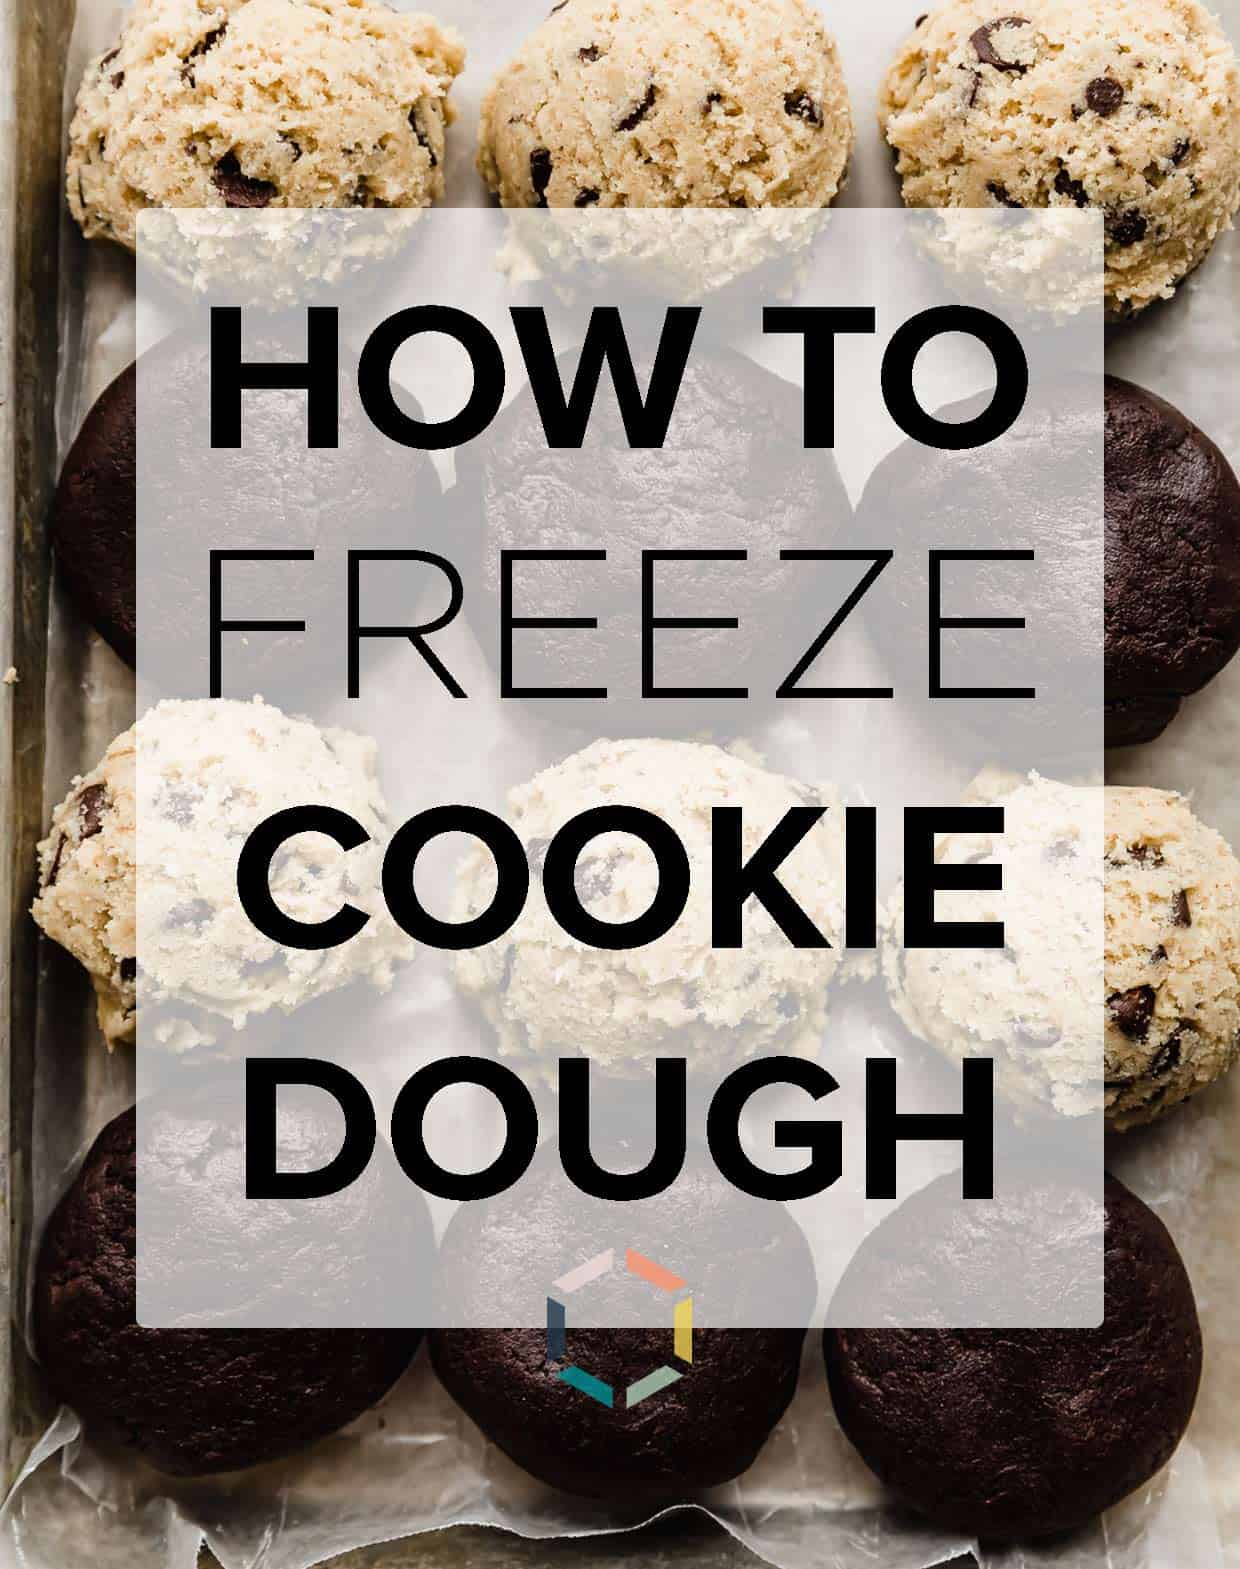 Cookie dough balls lined up on a baking sheet with the words "how to freeze cookie dough" in black text over the photo.